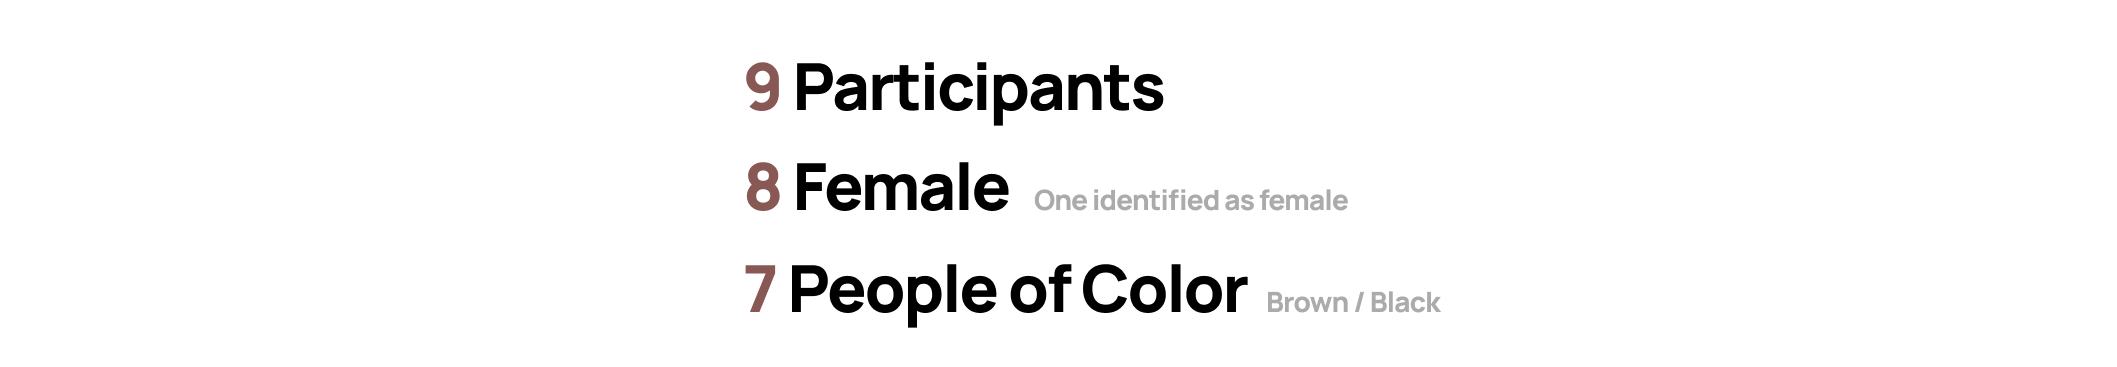 9 participants 8 female one identified as female 7 people of color